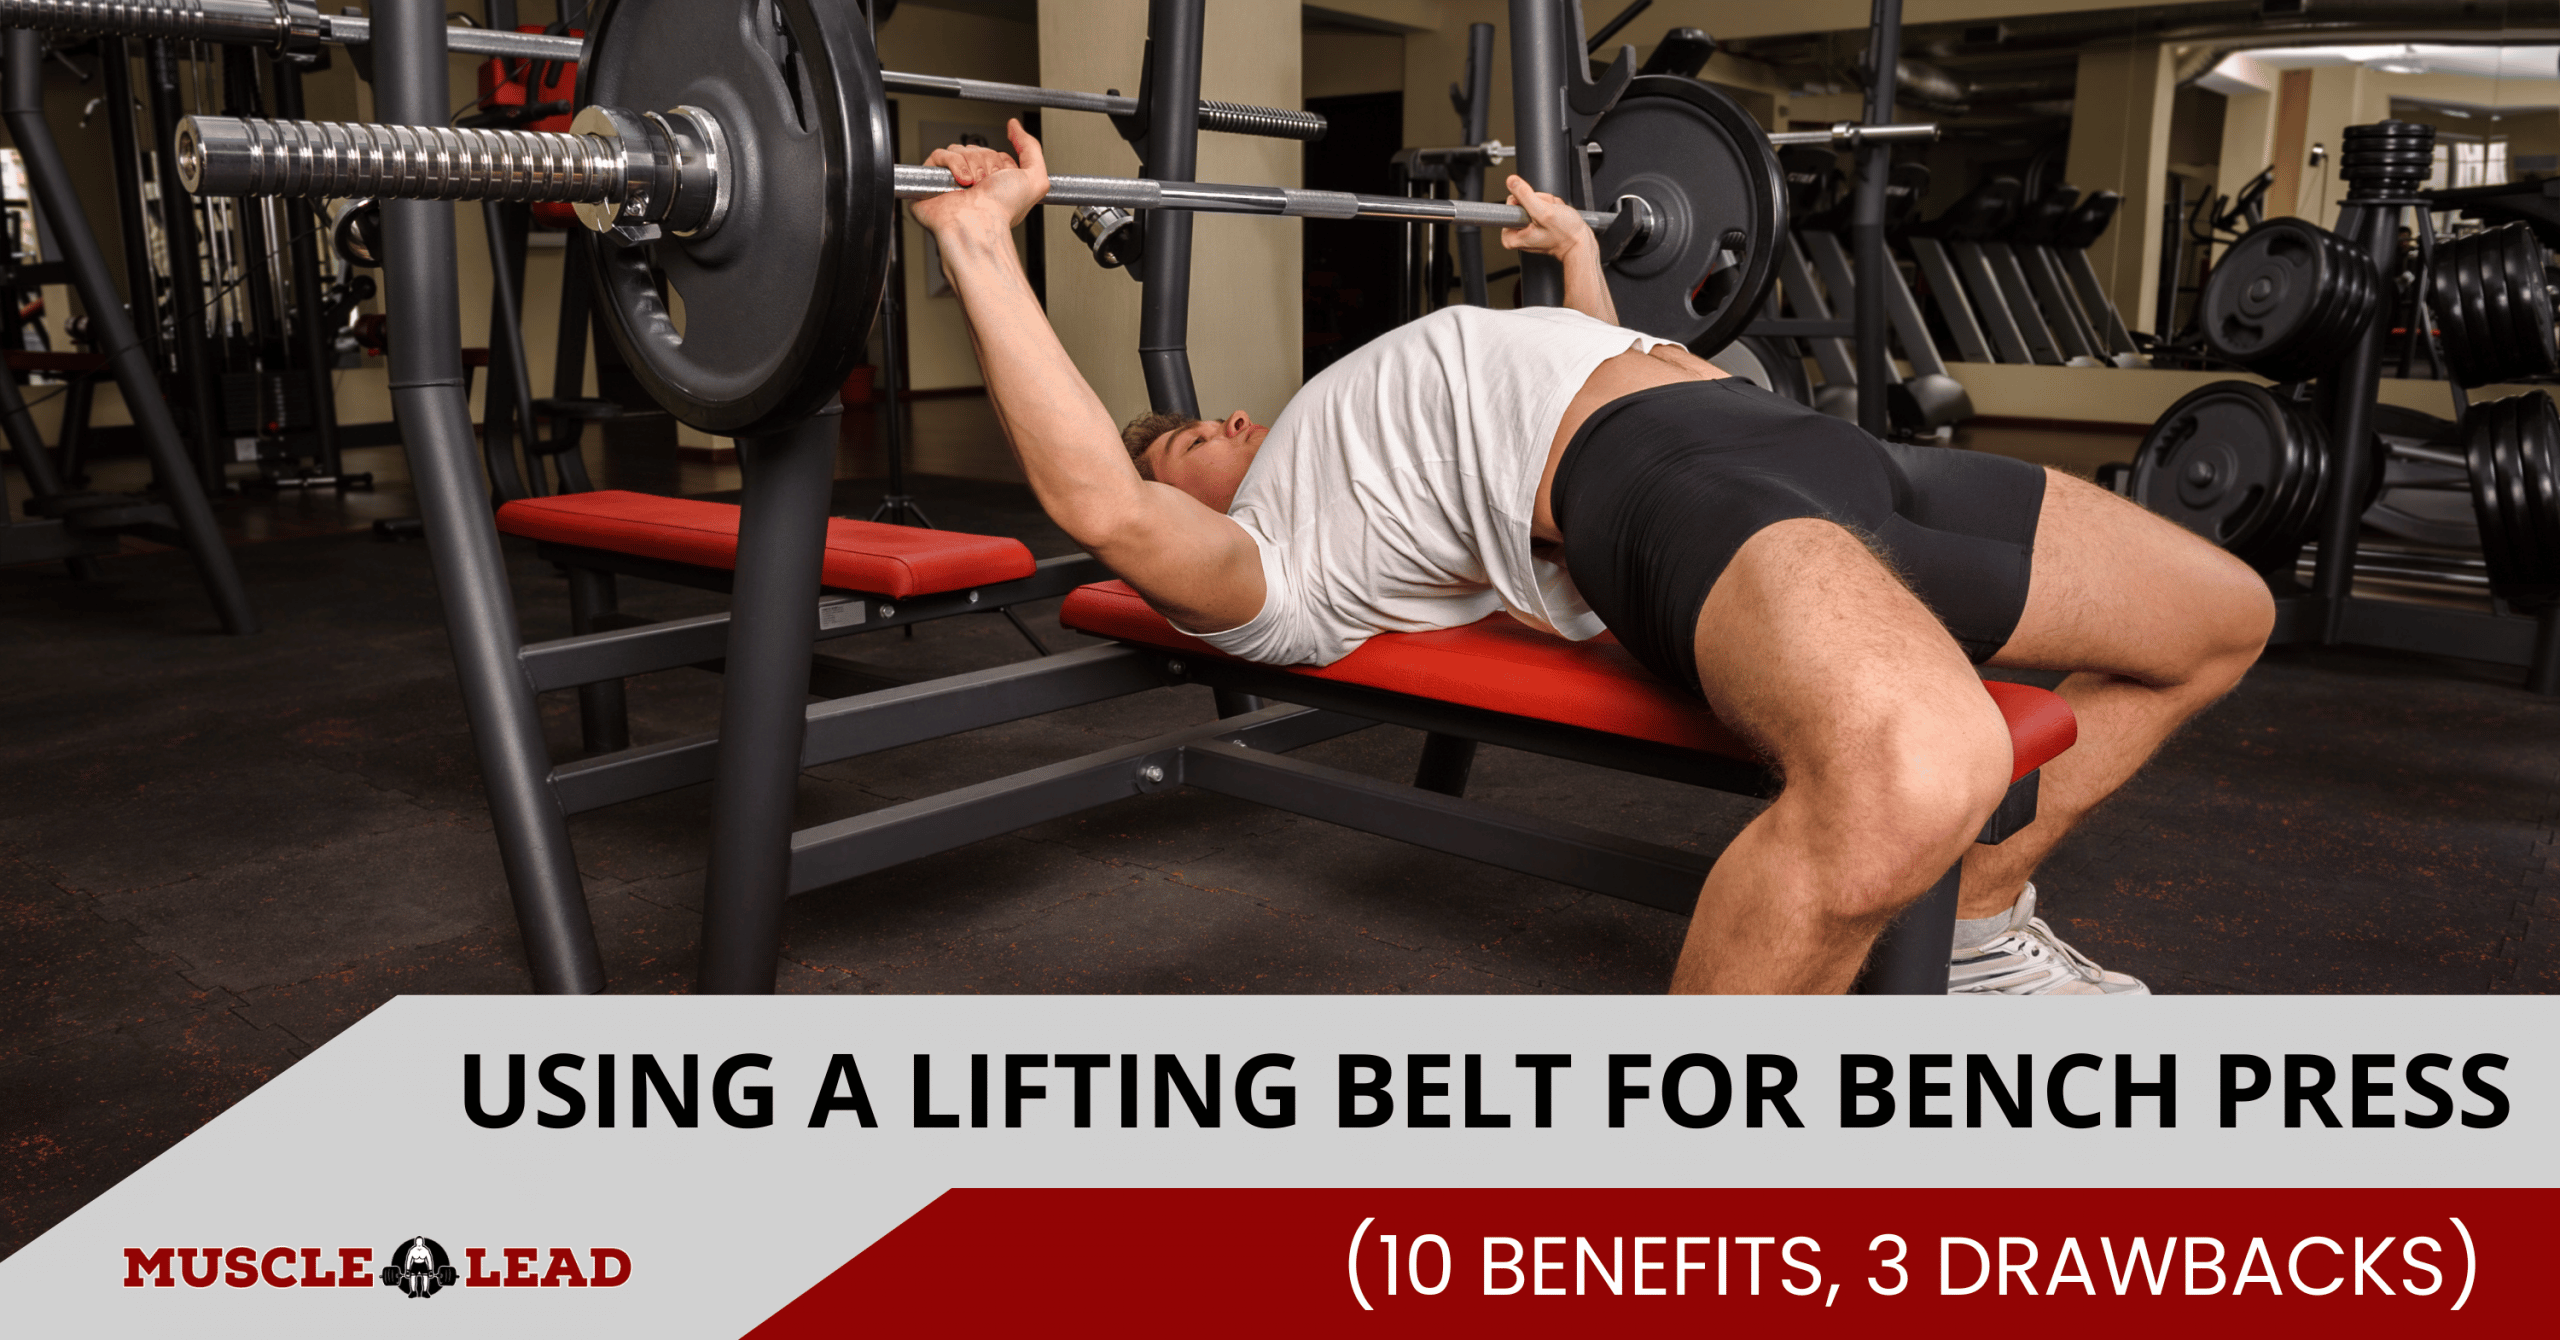 should you use a weight lifting belt for bench press? Some benefits and drawbacks